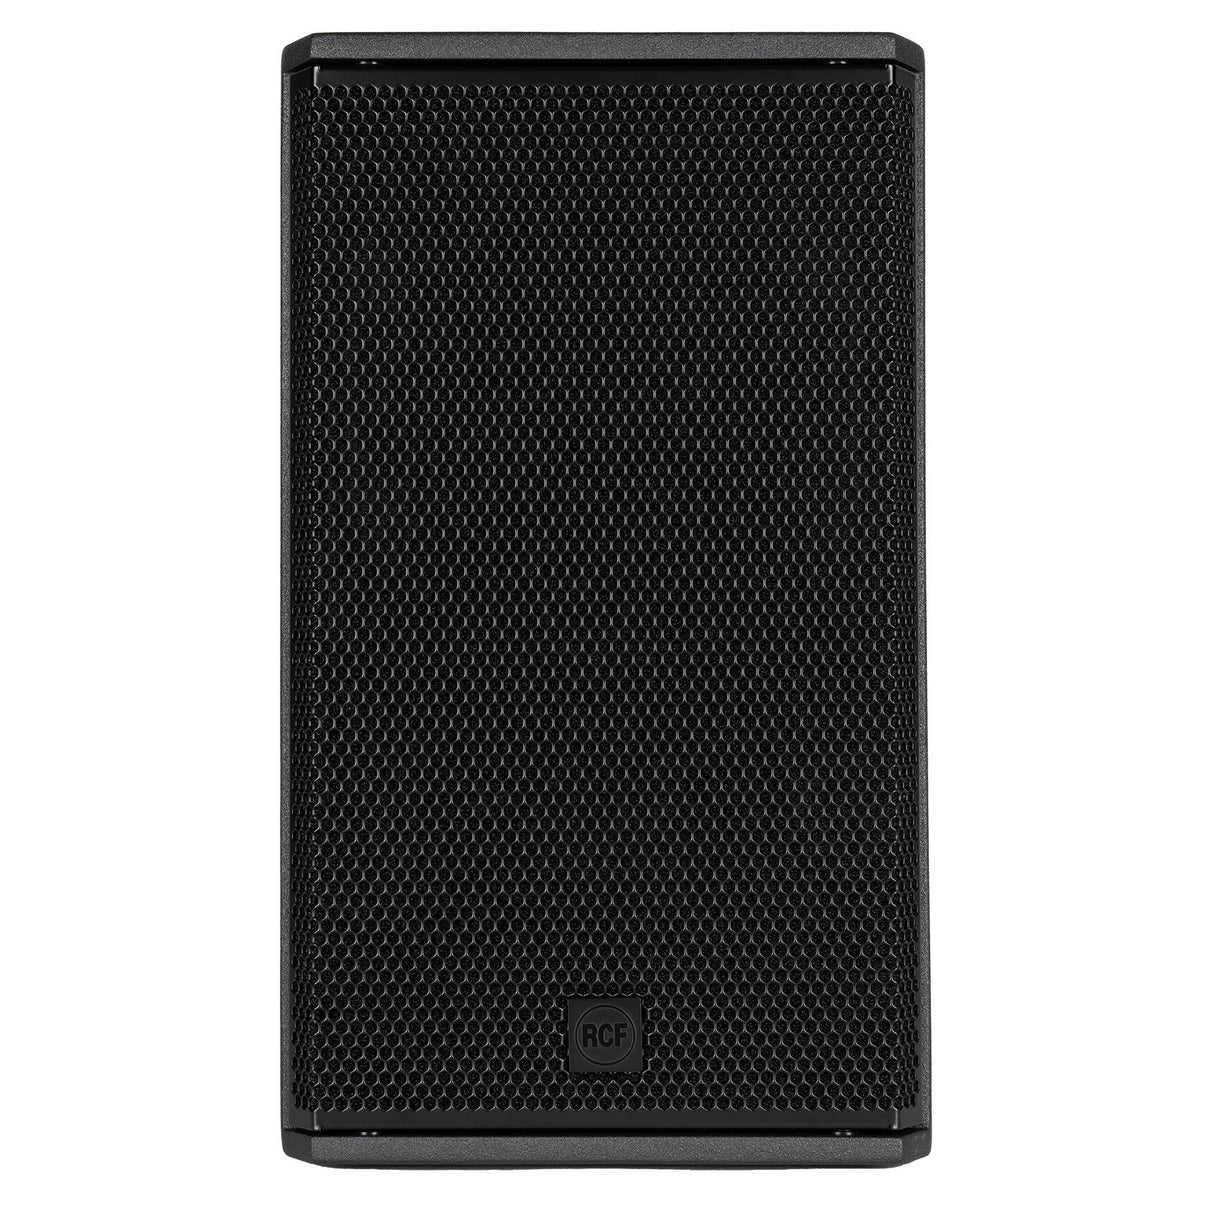 RCF NX 932-A 12-Inch 2100W Active Speaker